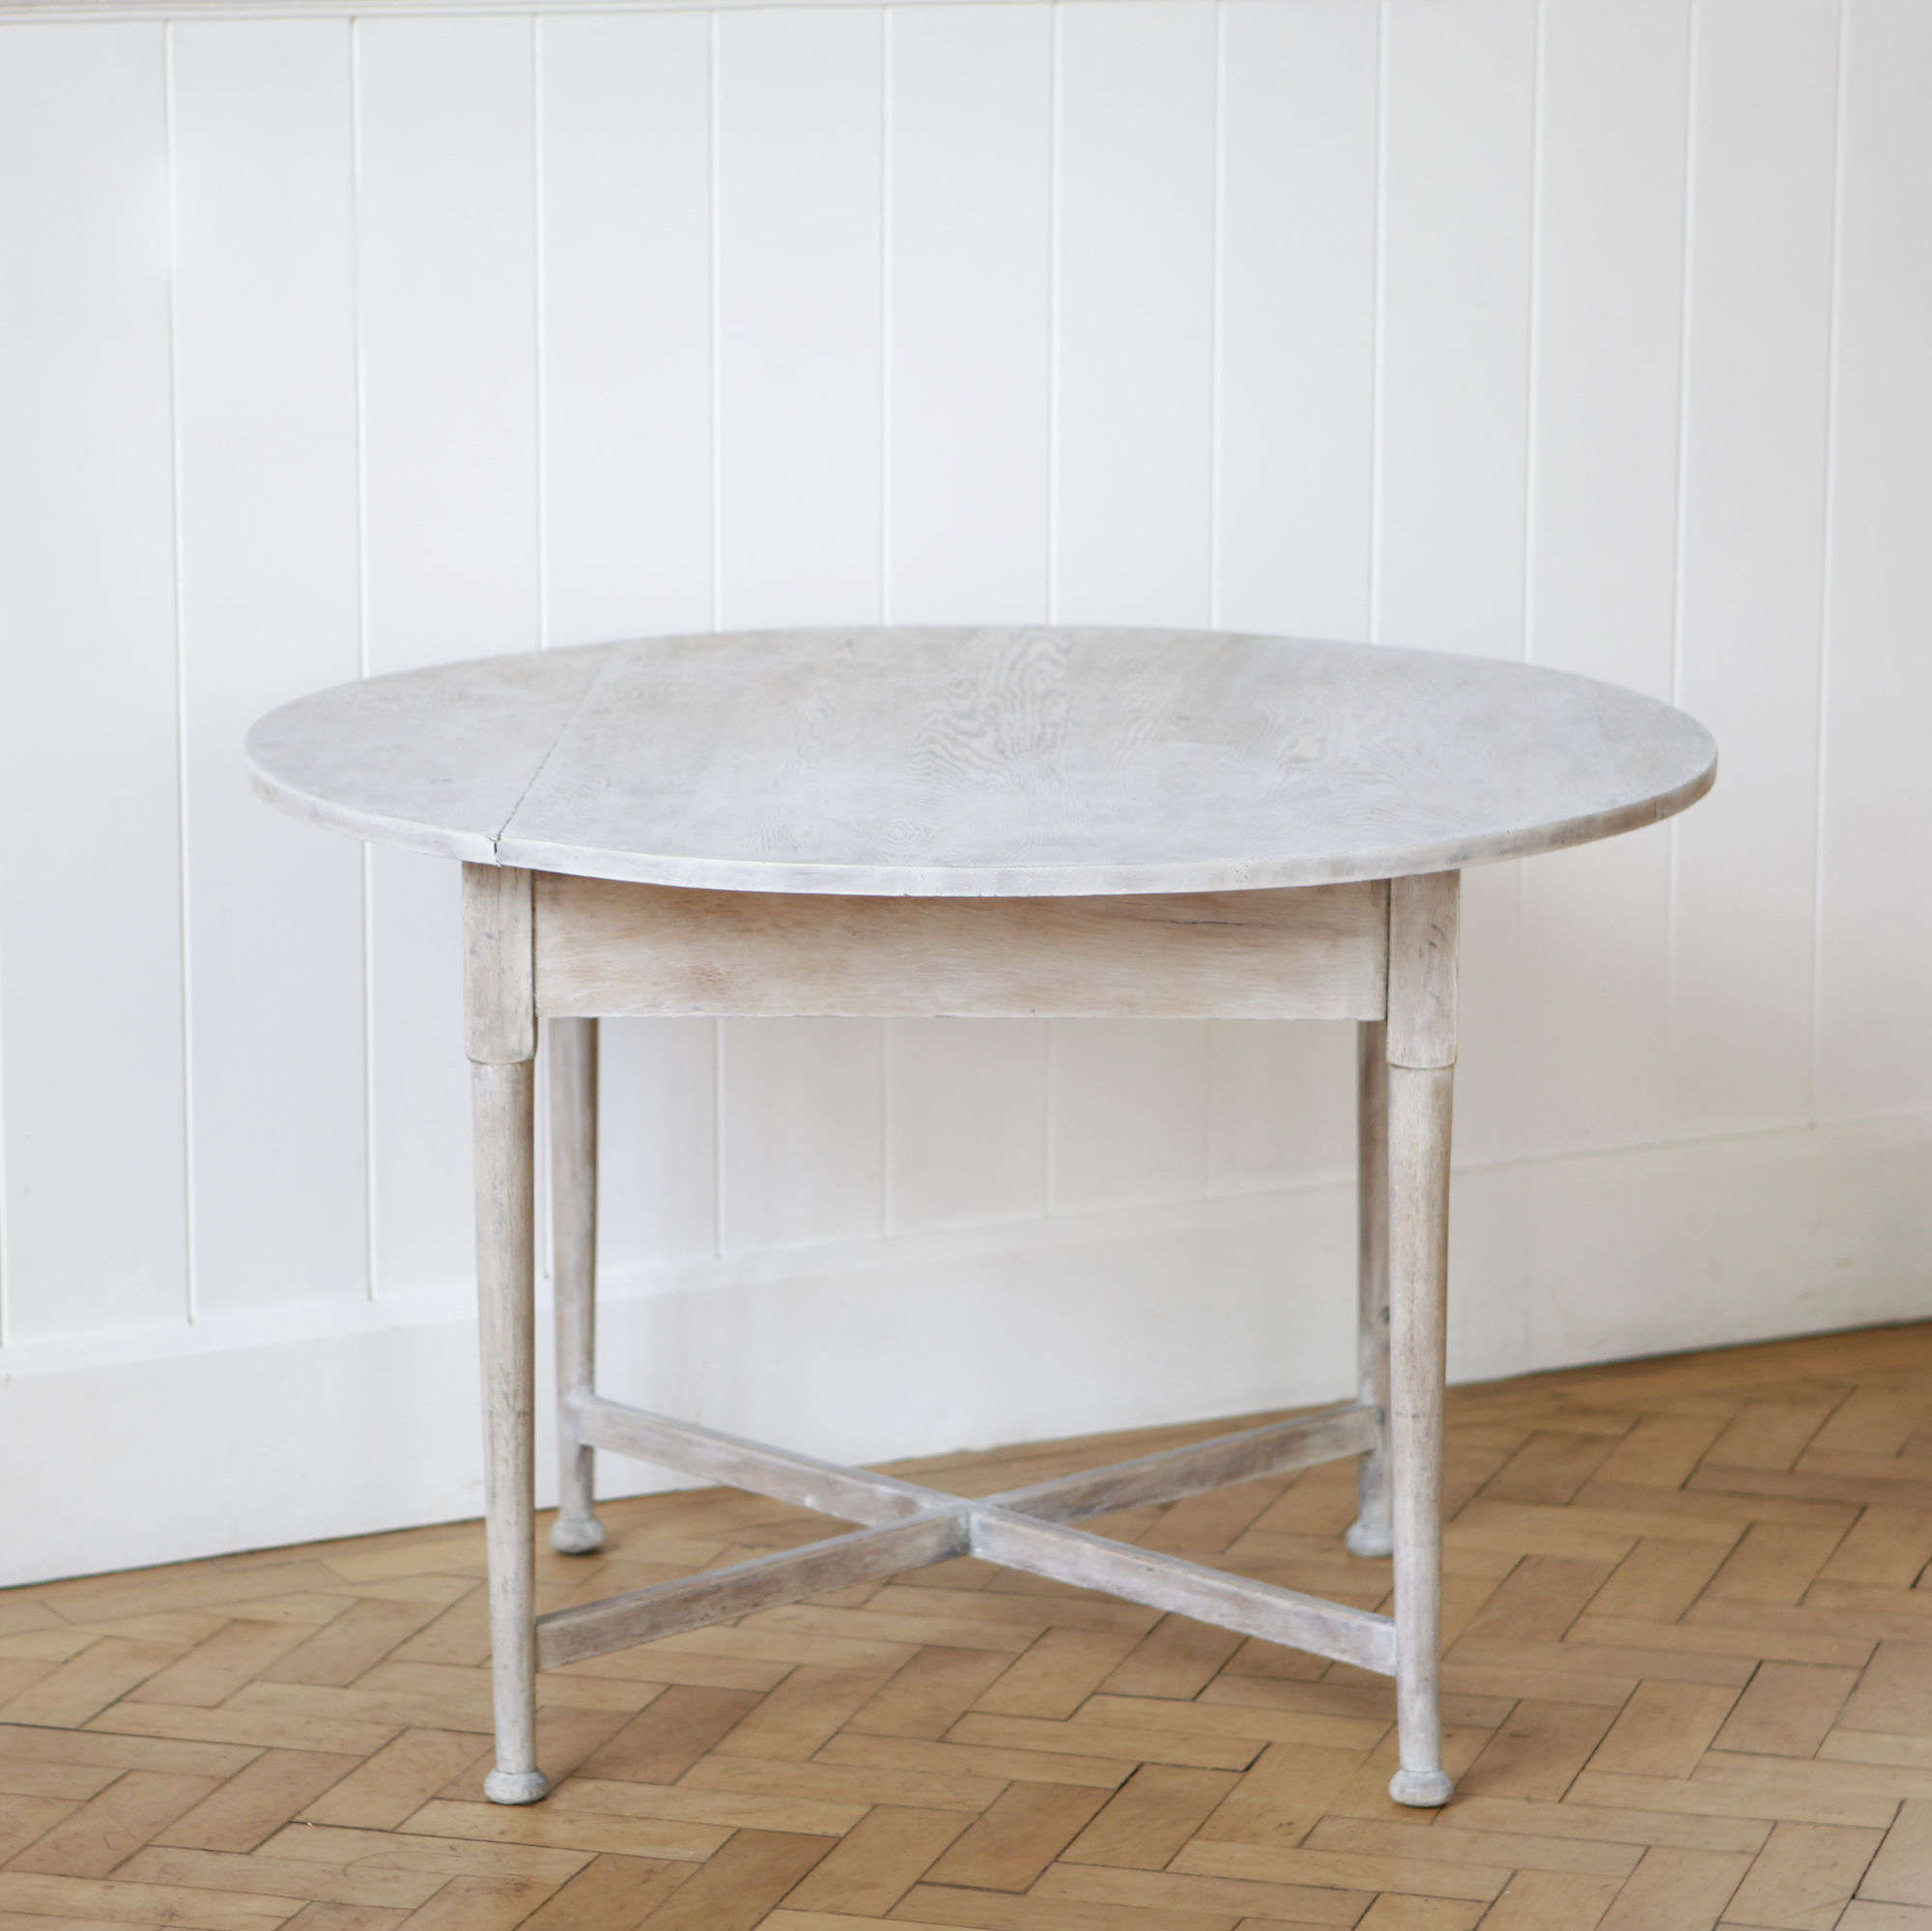 A good bleached and limed oak centre table.